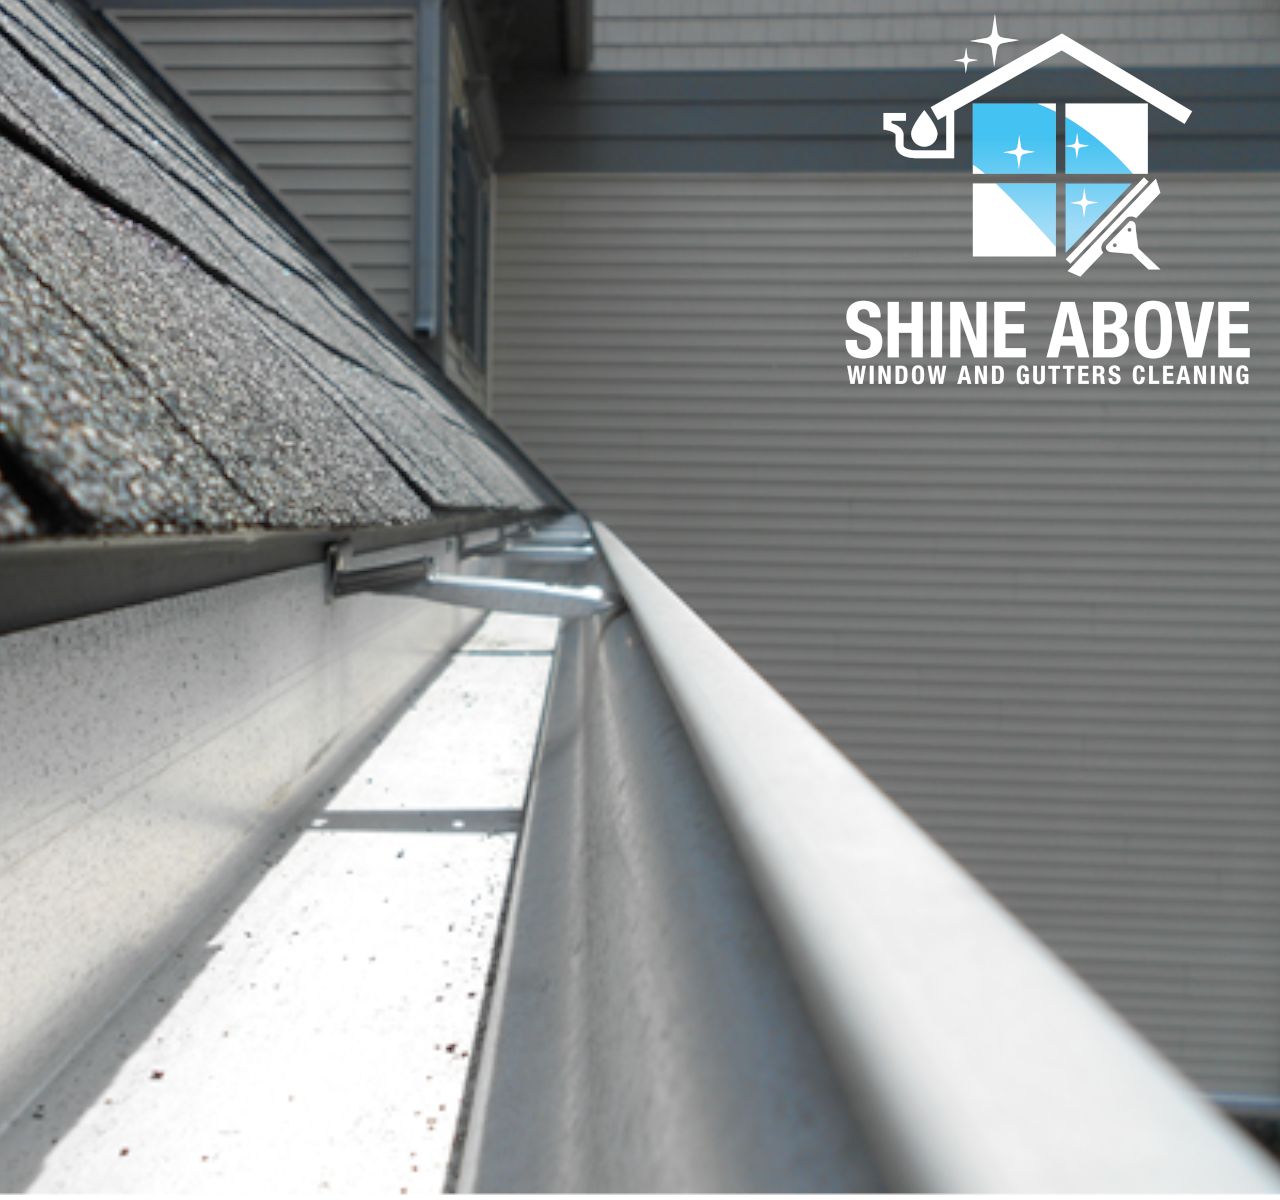 Shine Above Window and Gutter Cleaning